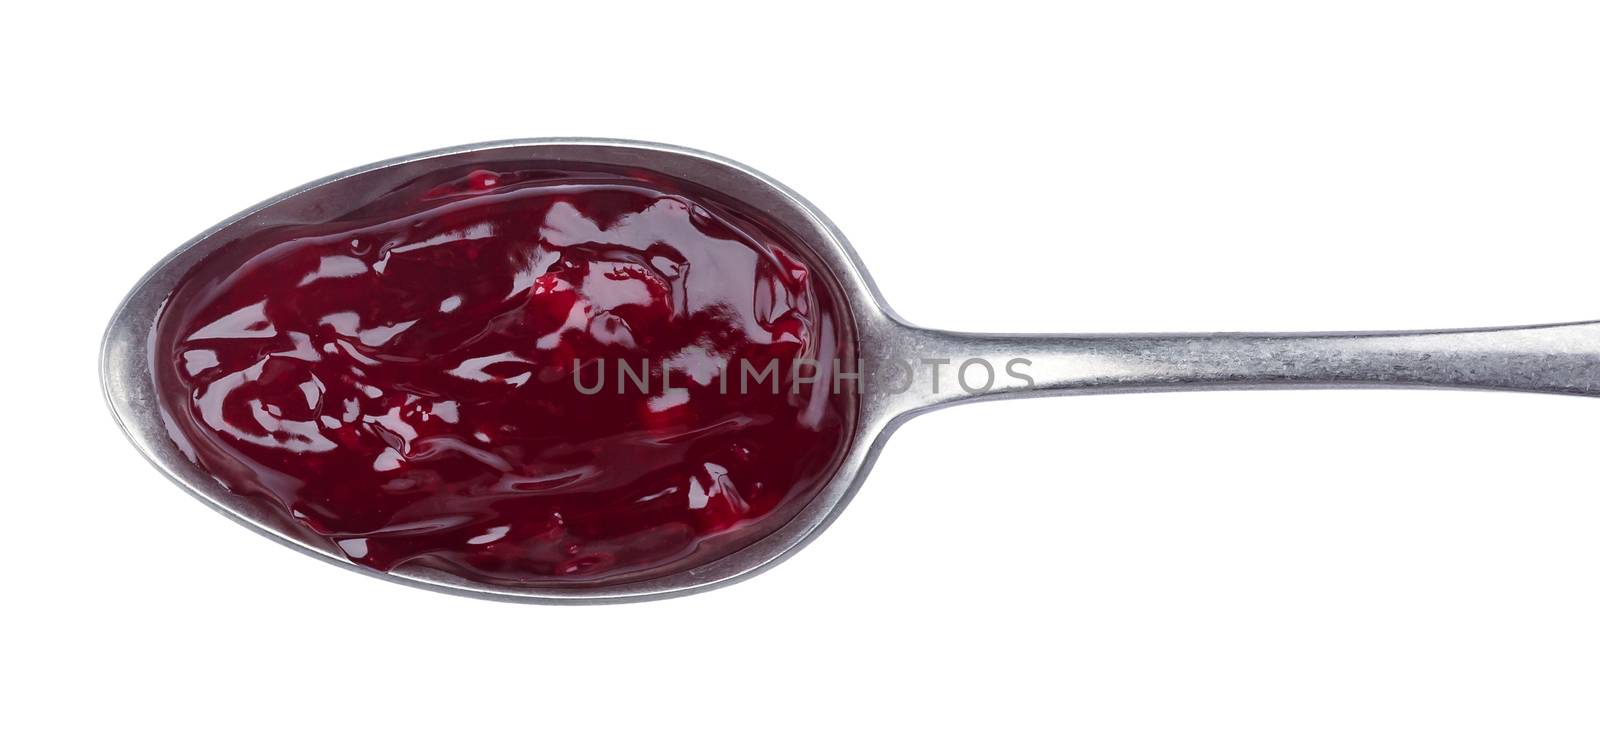 Spoon of red jam isolated on white background, top view by xamtiw